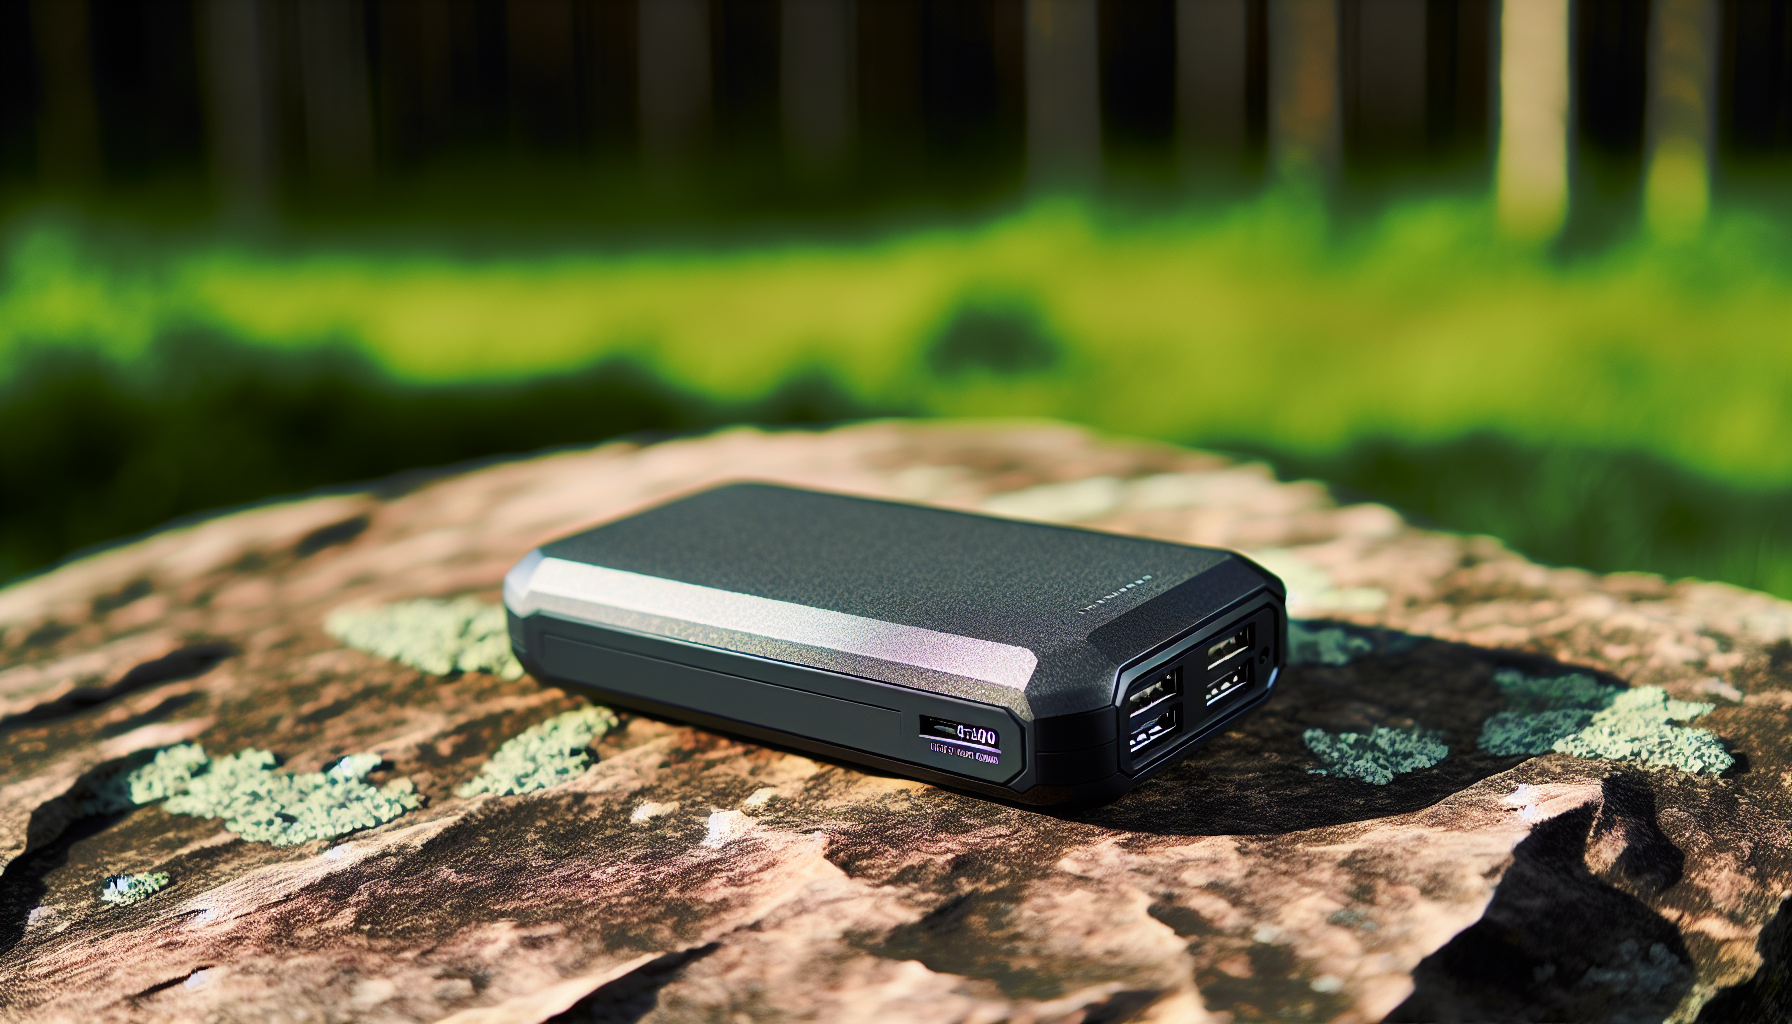 Rugged power bank in outdoor setting